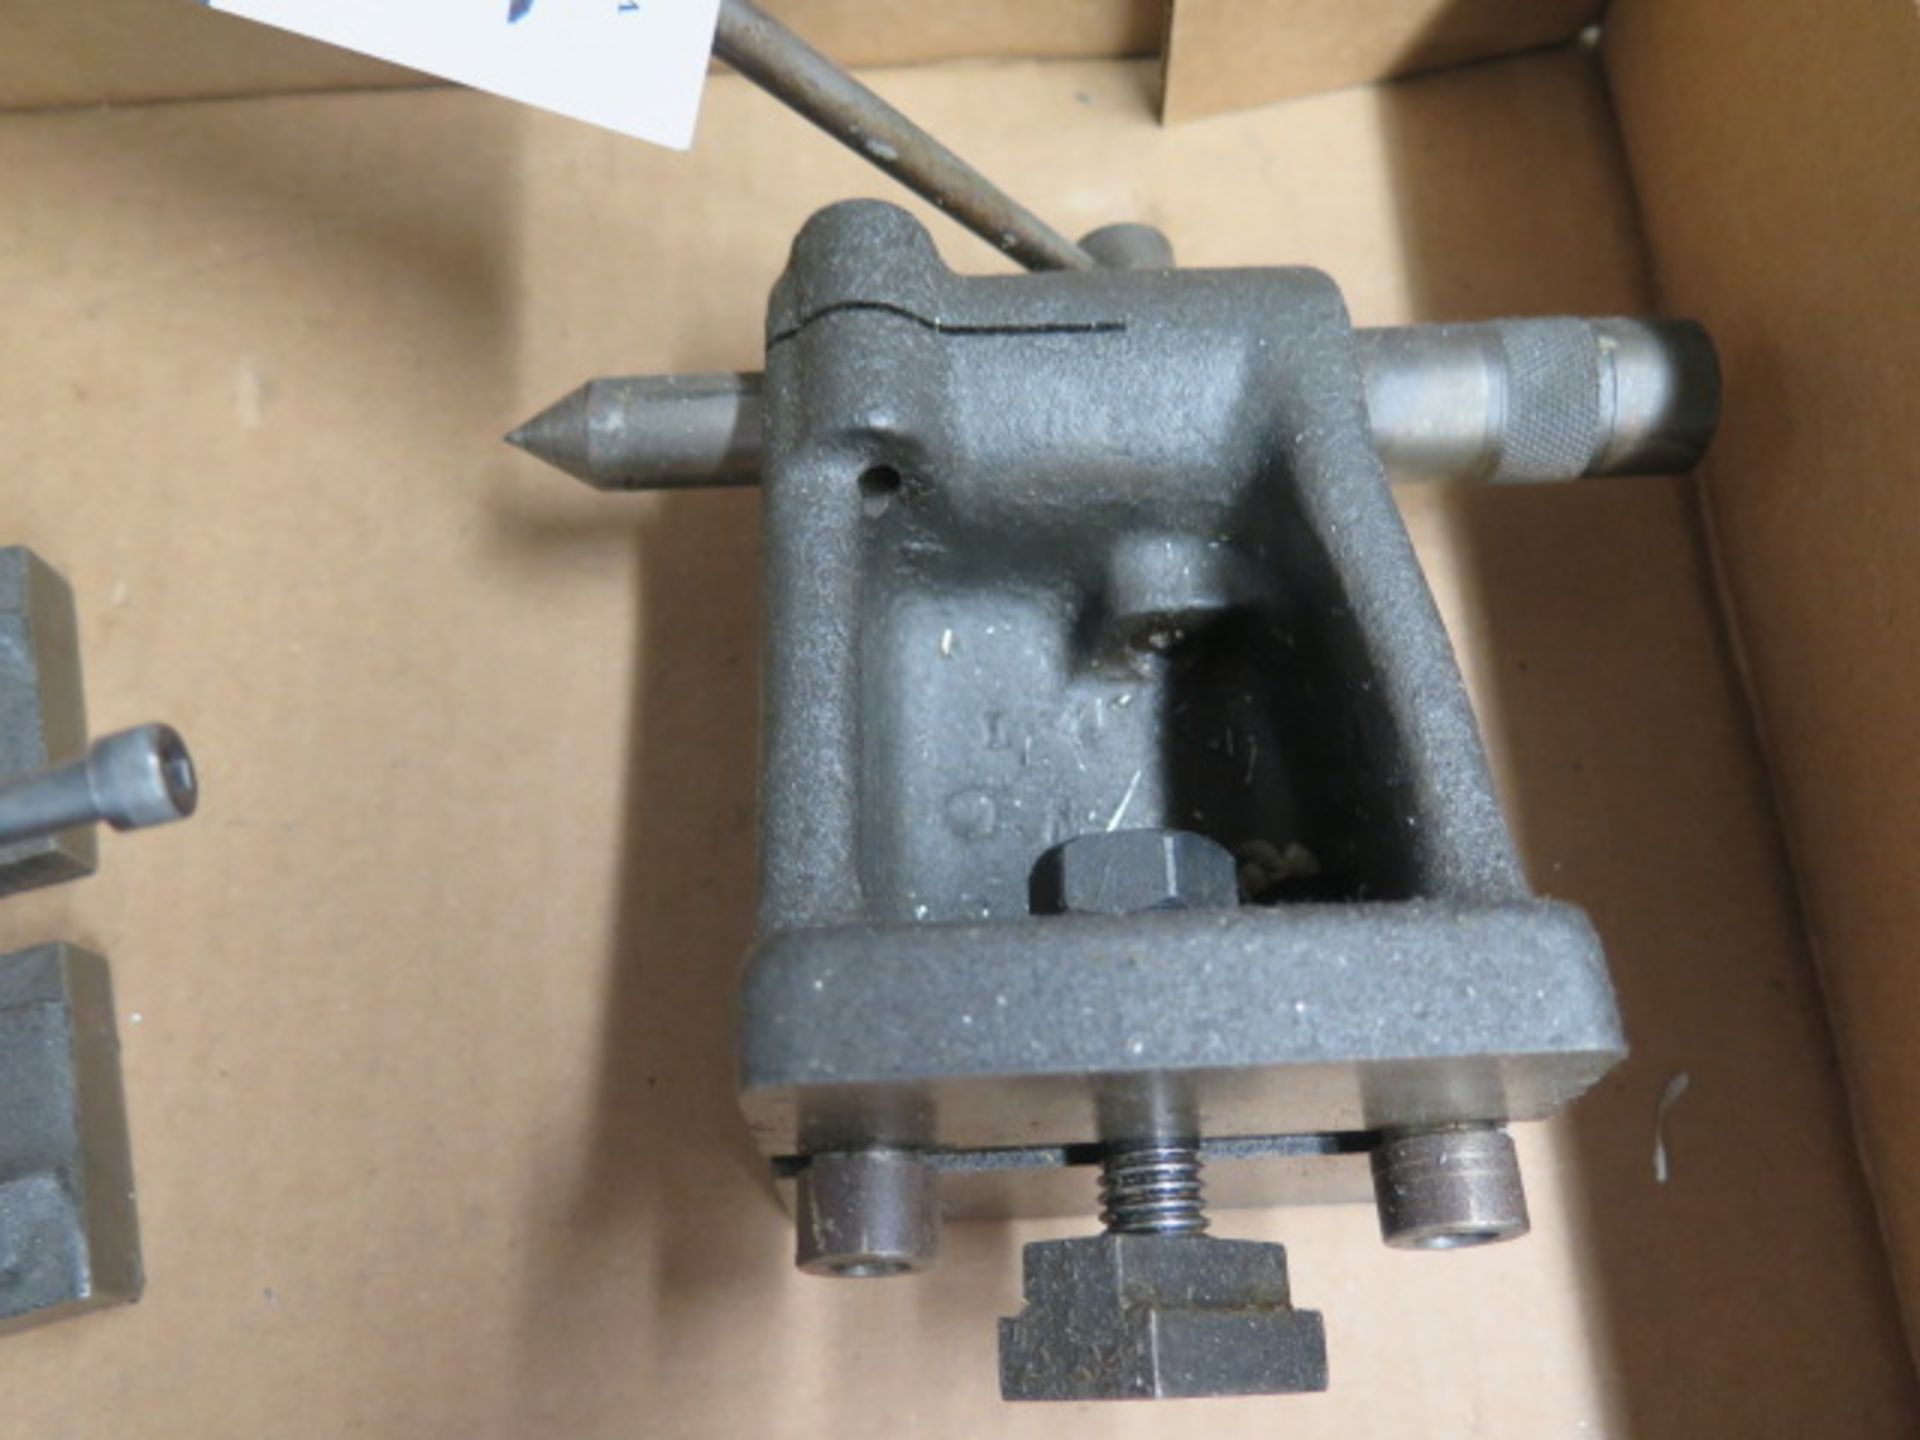 Hardinge 5C Indexing Head and Tailstock (SOLD AS-IS - NO WARRANTY) - Image 4 of 4